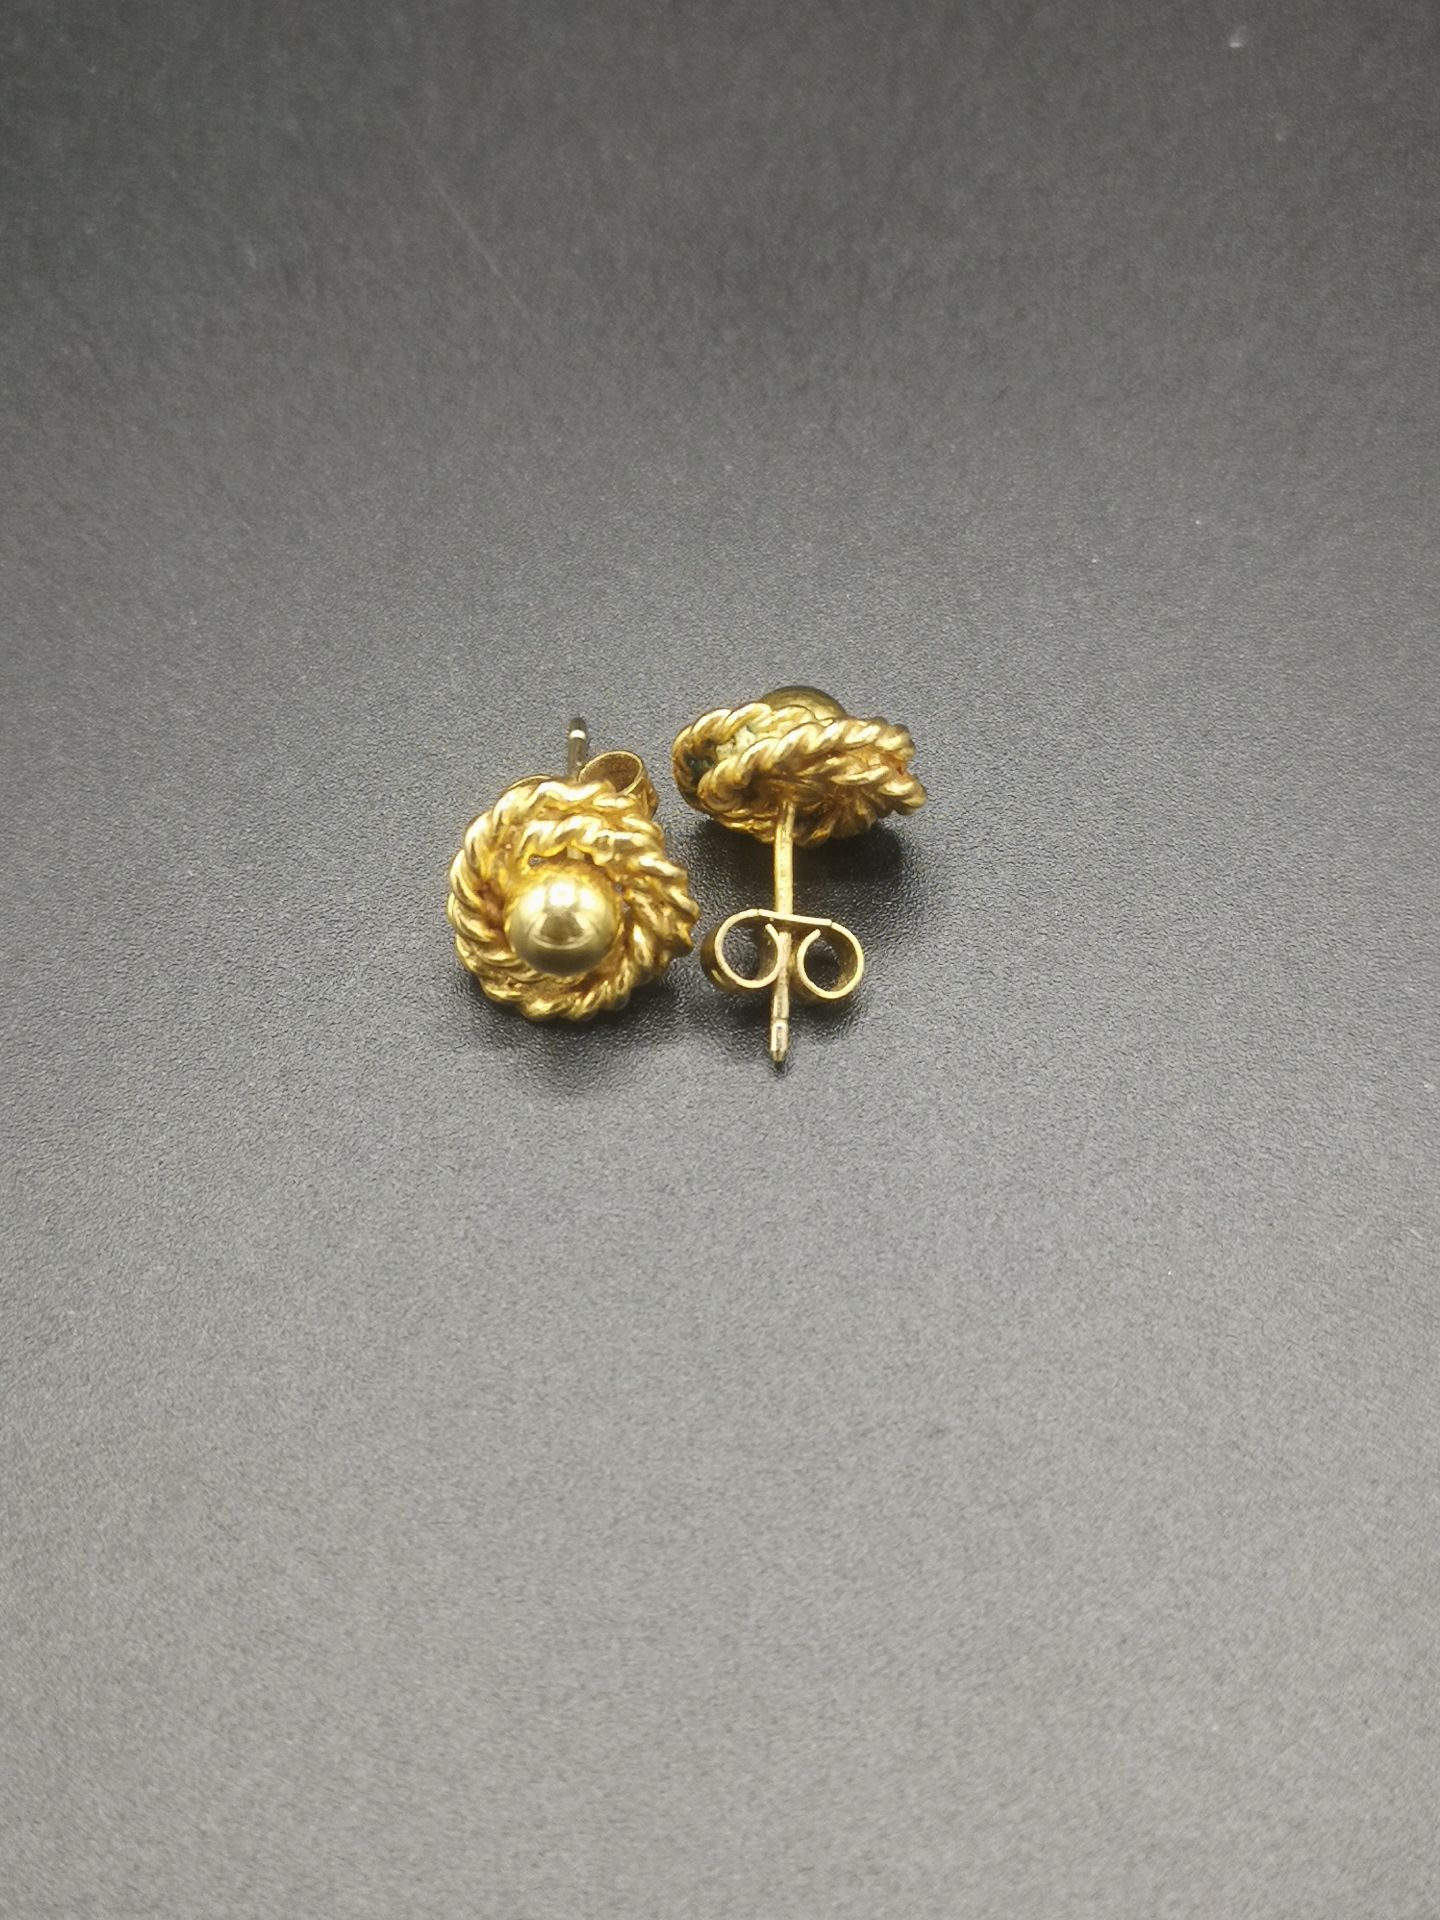 9ct gold pair or earrings - Image 3 of 3